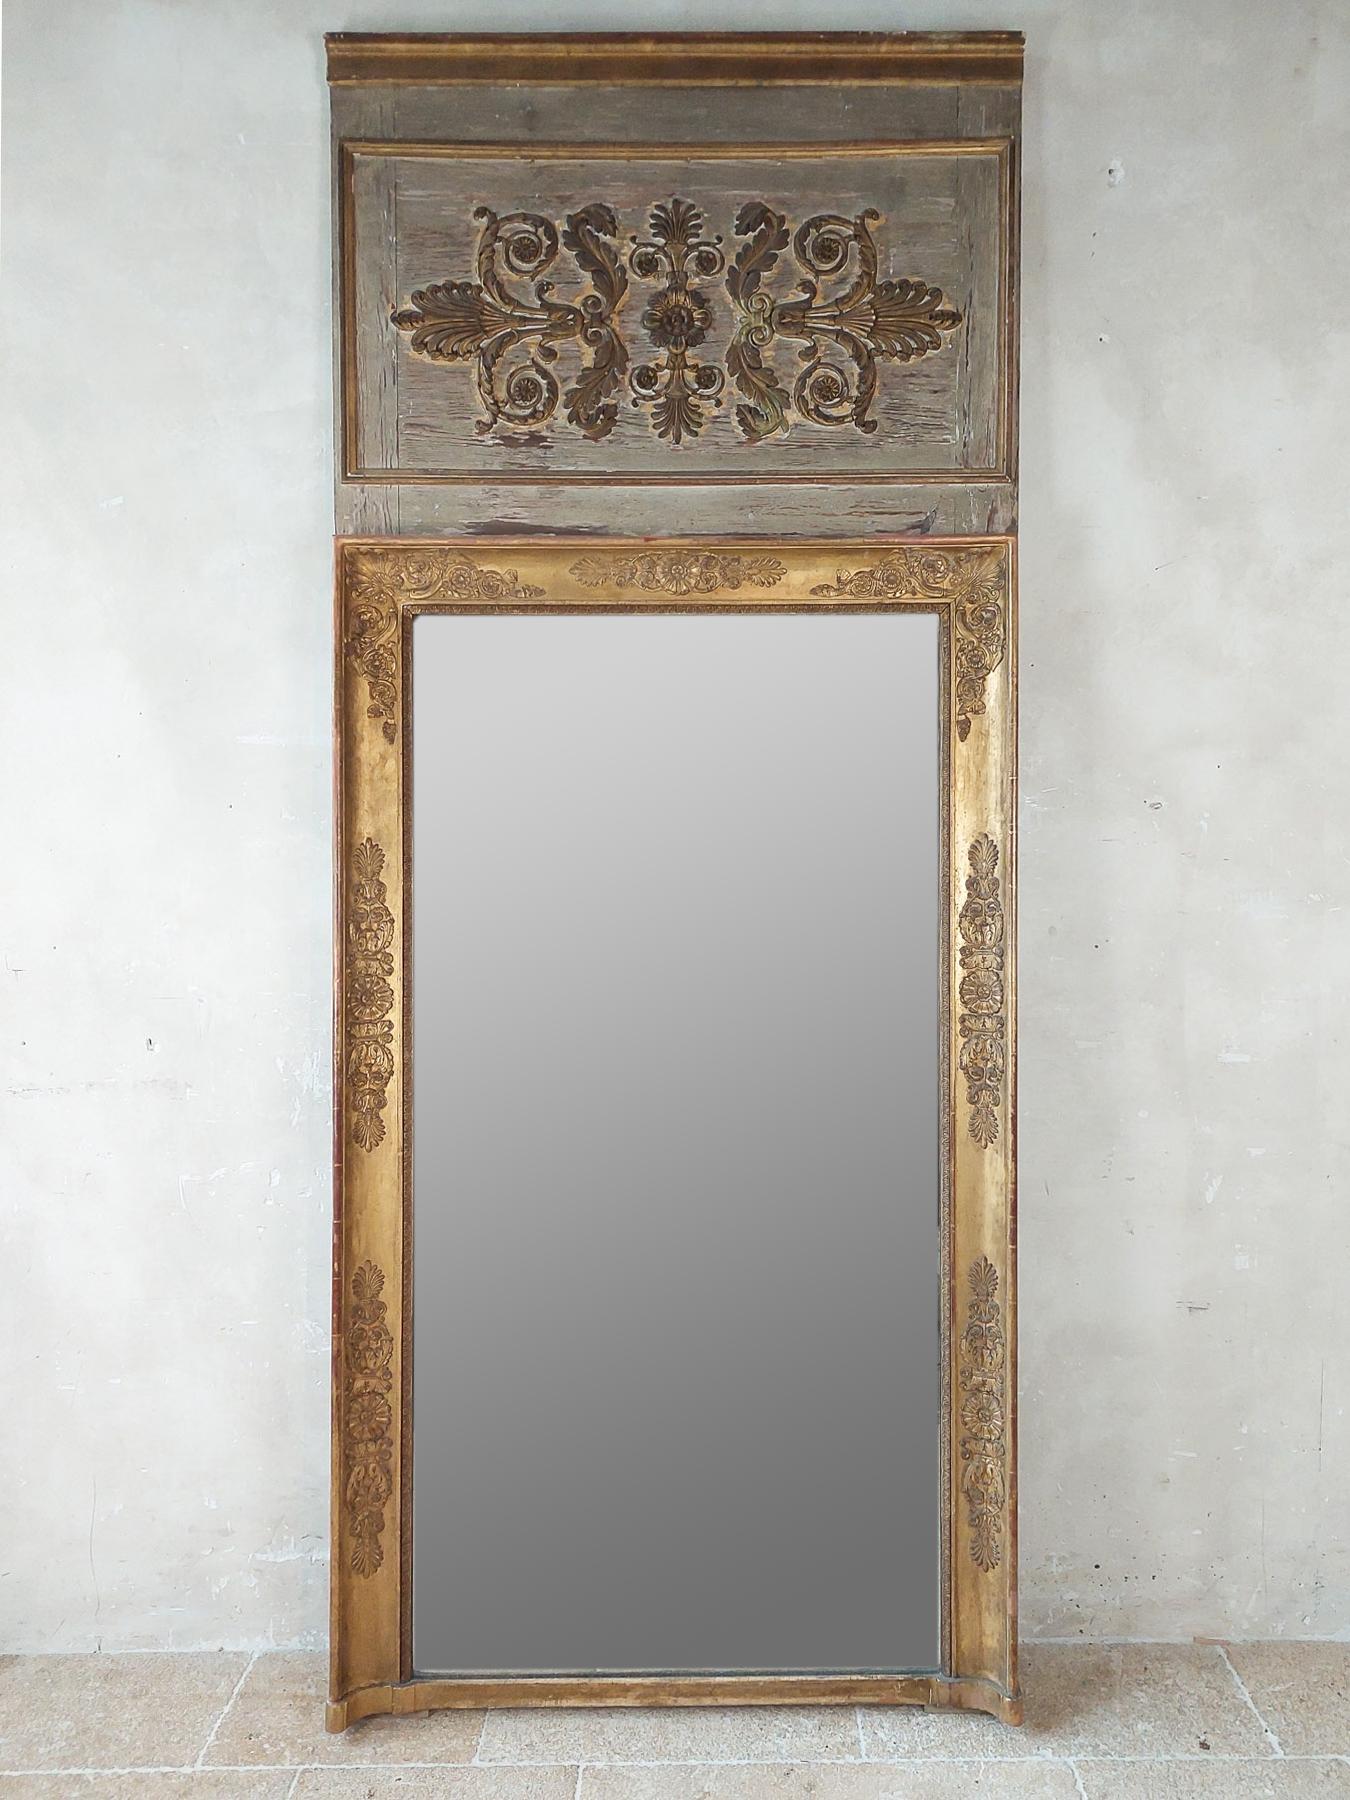 Wood carved empire trumeau mirror from ± 1800 - 1820. The gold frame of gold leaf gilded wood carving decorated with palmettes and rosettes. Trumeau mirrors were the mirrors above a fireplace in the panelling.

This antique mirror has old glass